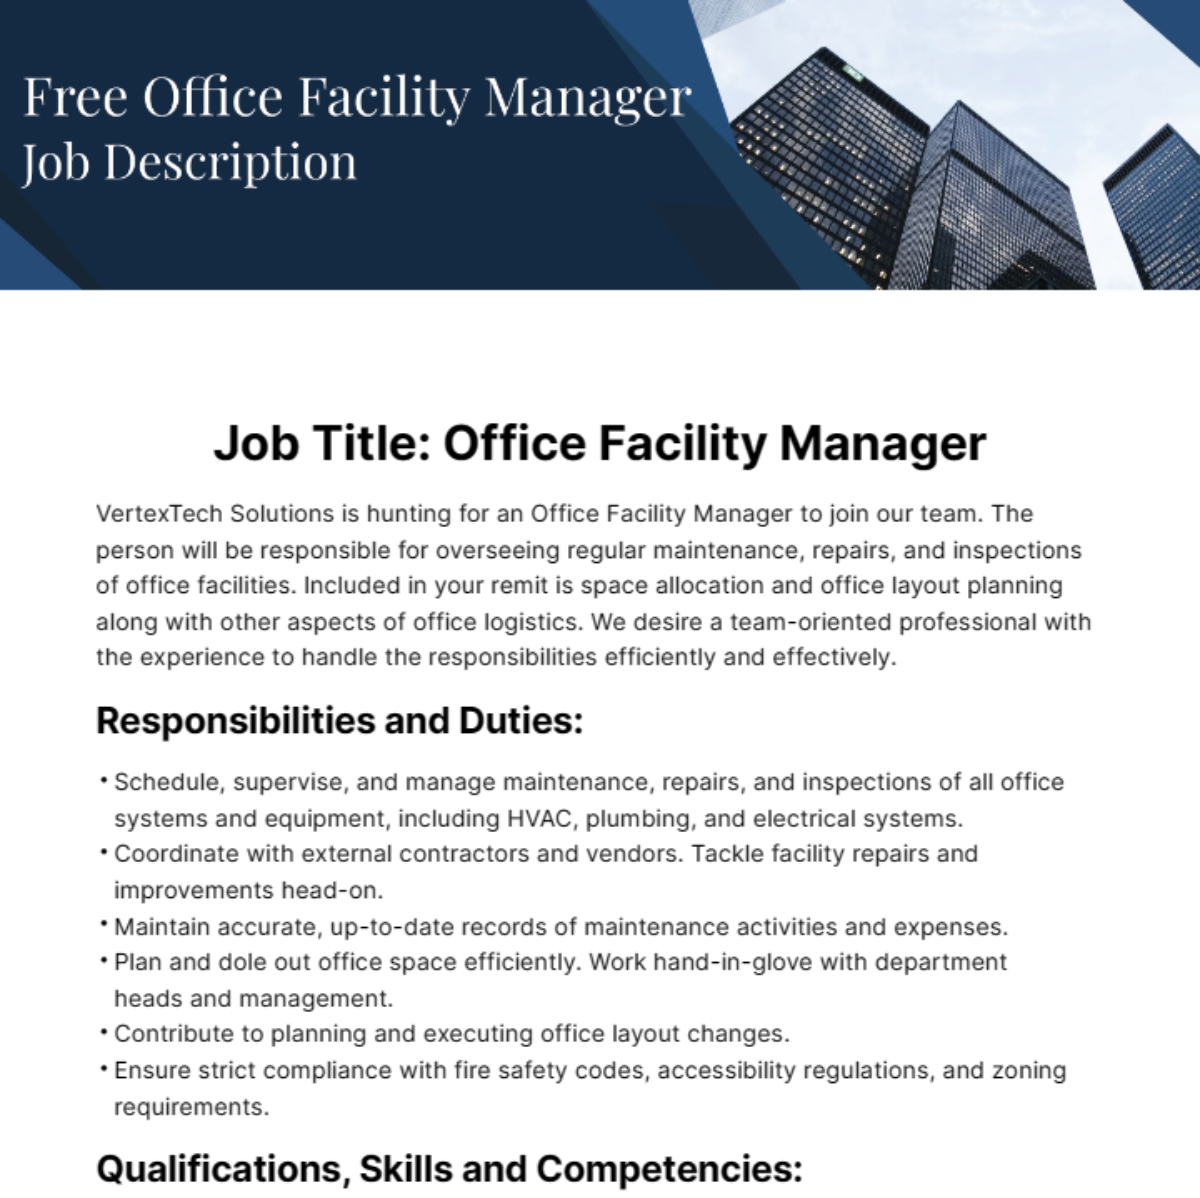 Free Office Facility Manager Job Description Template